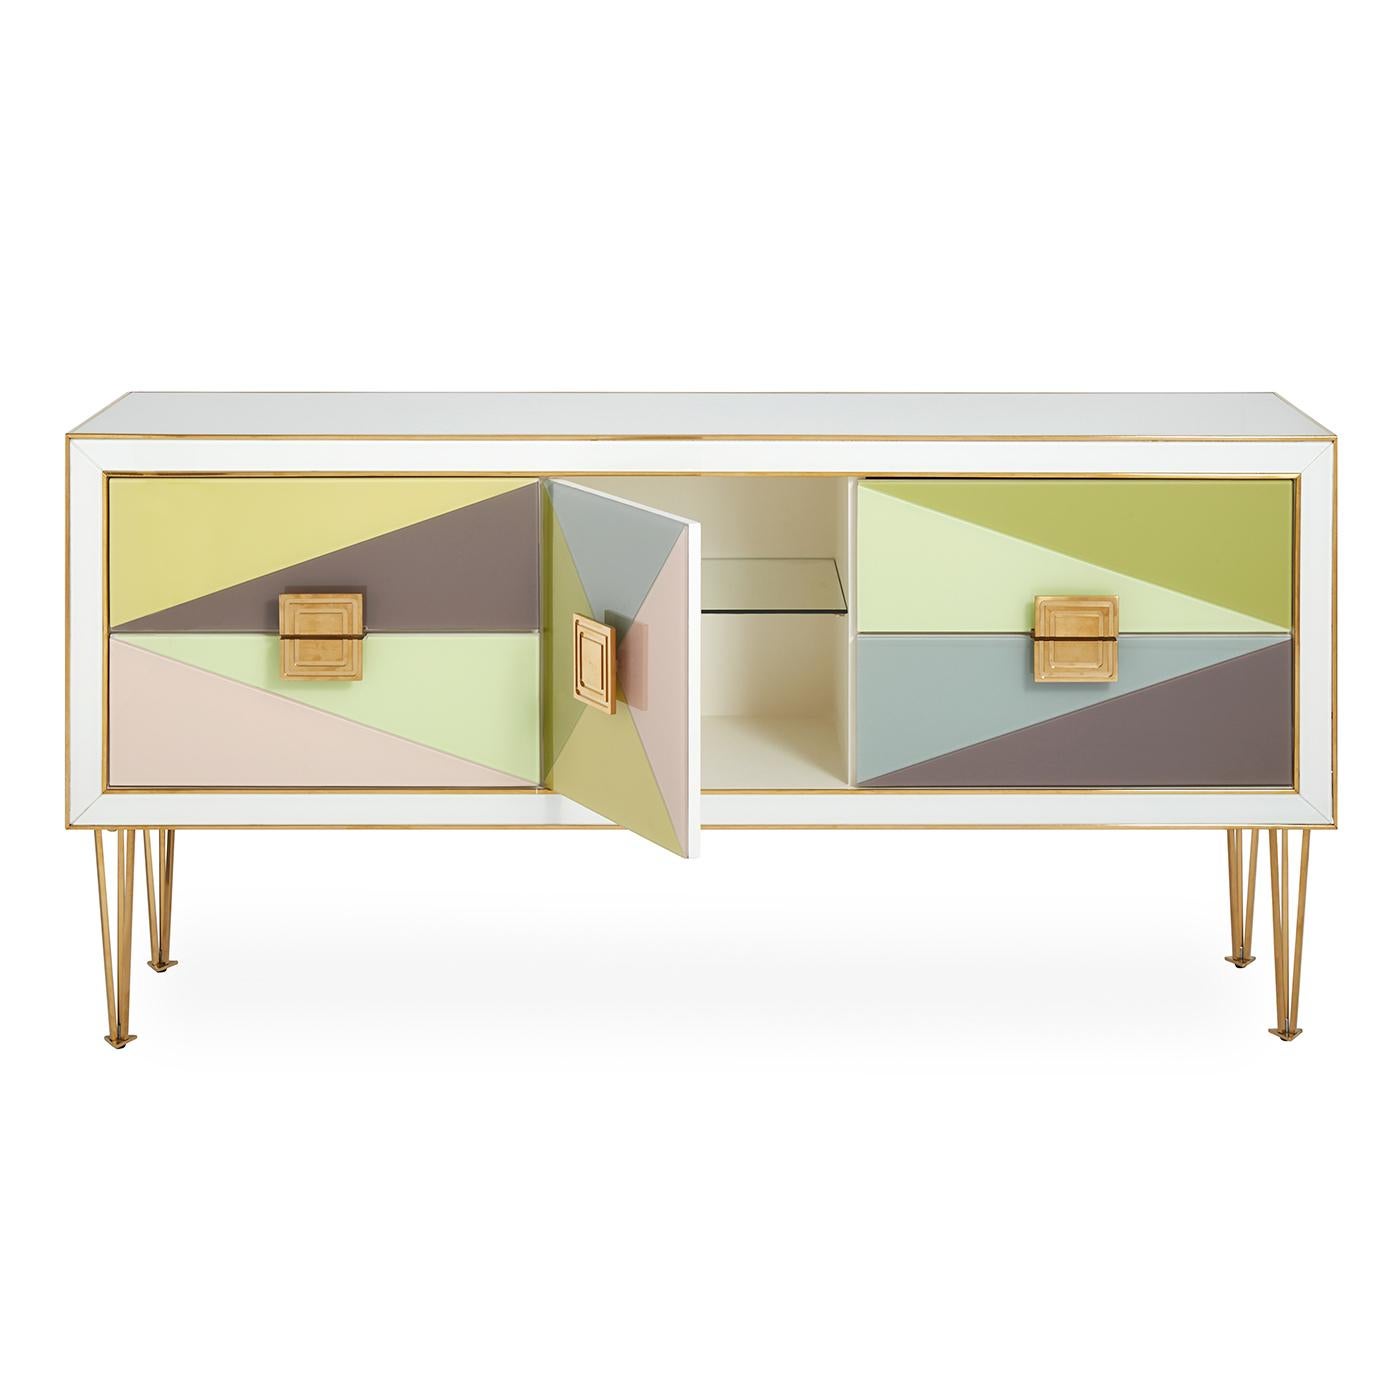 Avant Wow. A little Italian Modern, a lot of irresistible color. Our Harlequin Credenza features back-painted glass panes in angular forms in muted, sunrise-inspired hues. The ivory case is tipped with brass edging, adorned with super-modern grooved